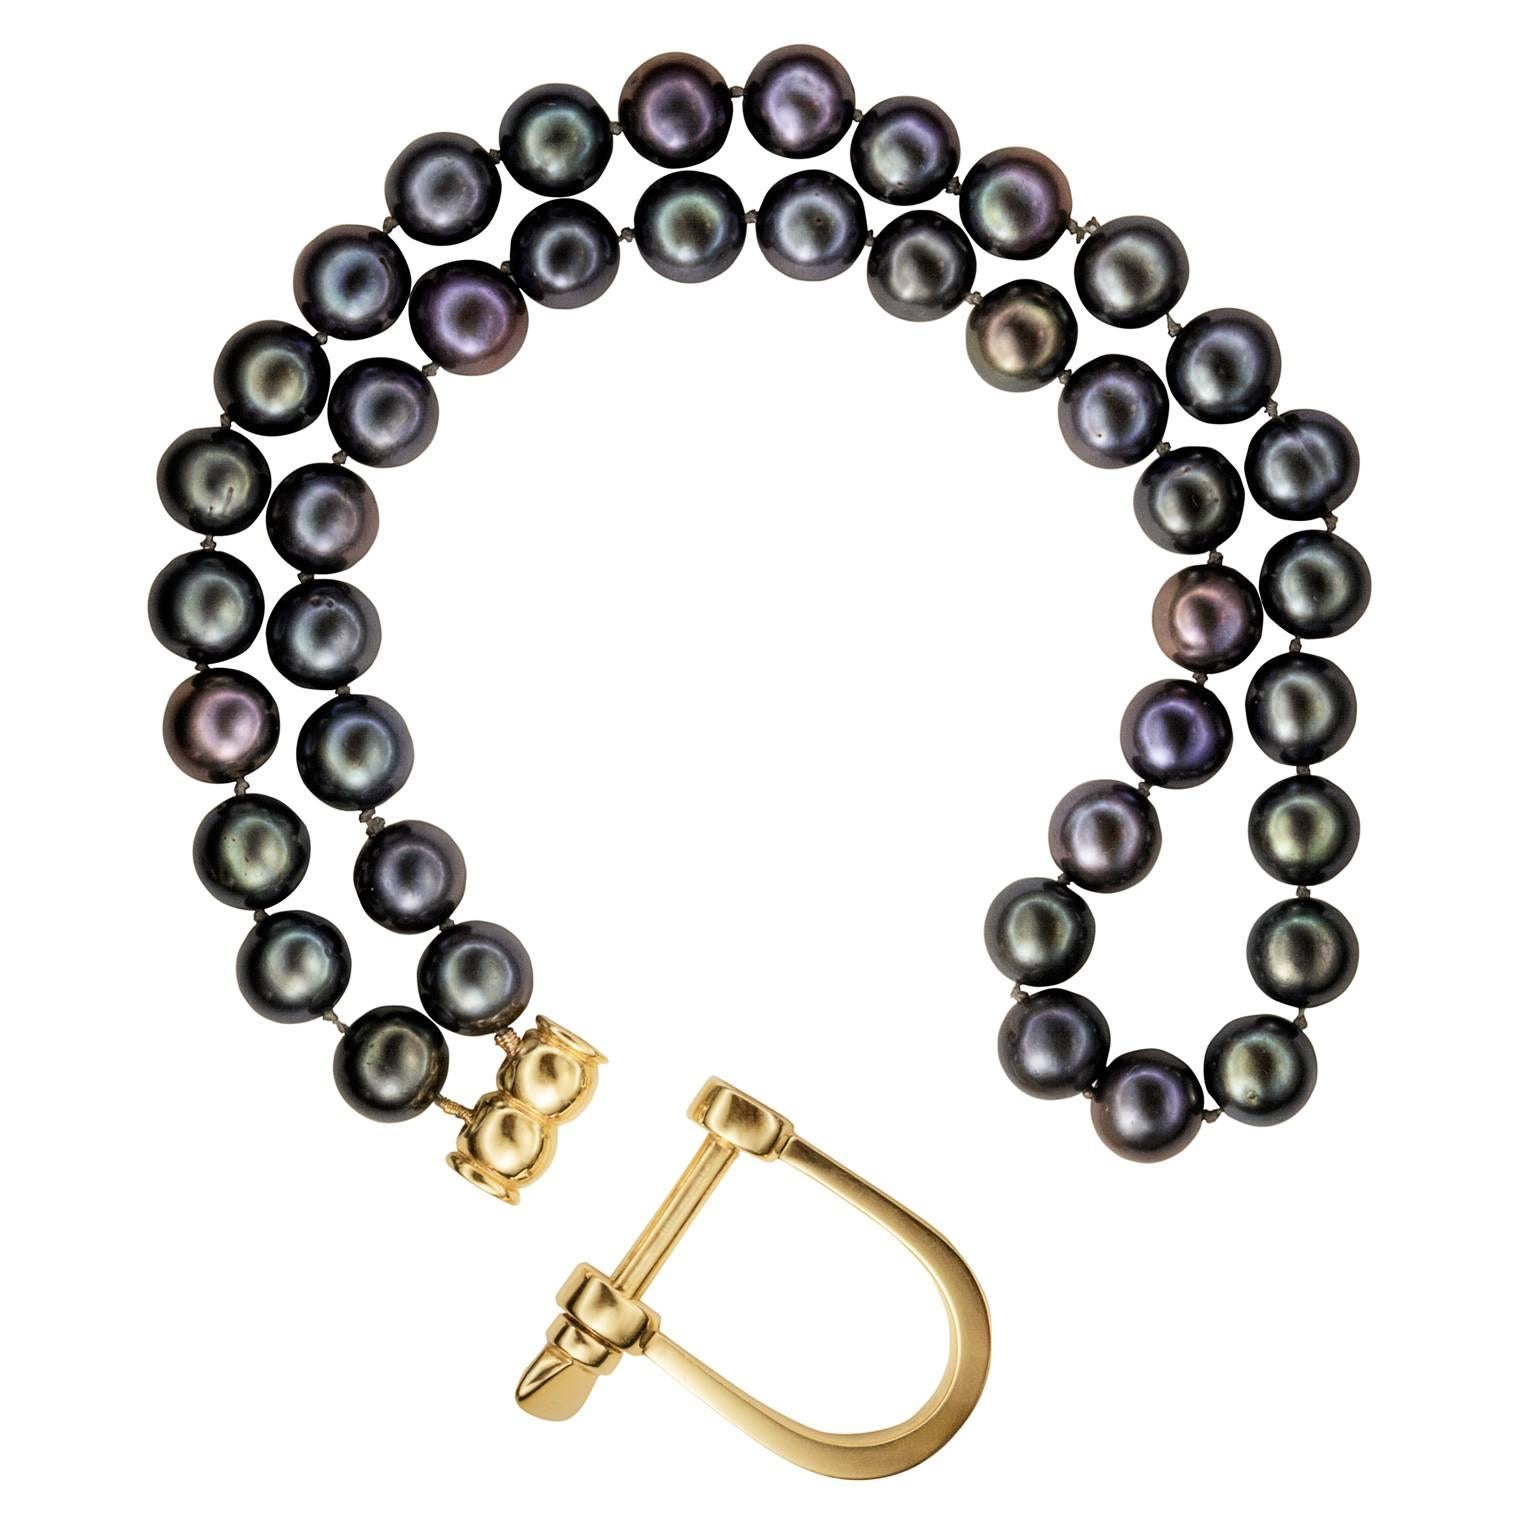 A double row of inky black Akoya pearls is clasped around the wrist with an unashamedly weighty 18K gold 'shackle' clasp. Subverting the preconceived ideas we hold of traditional pearls, this bracelet is not for the faint at heart. The sculpted